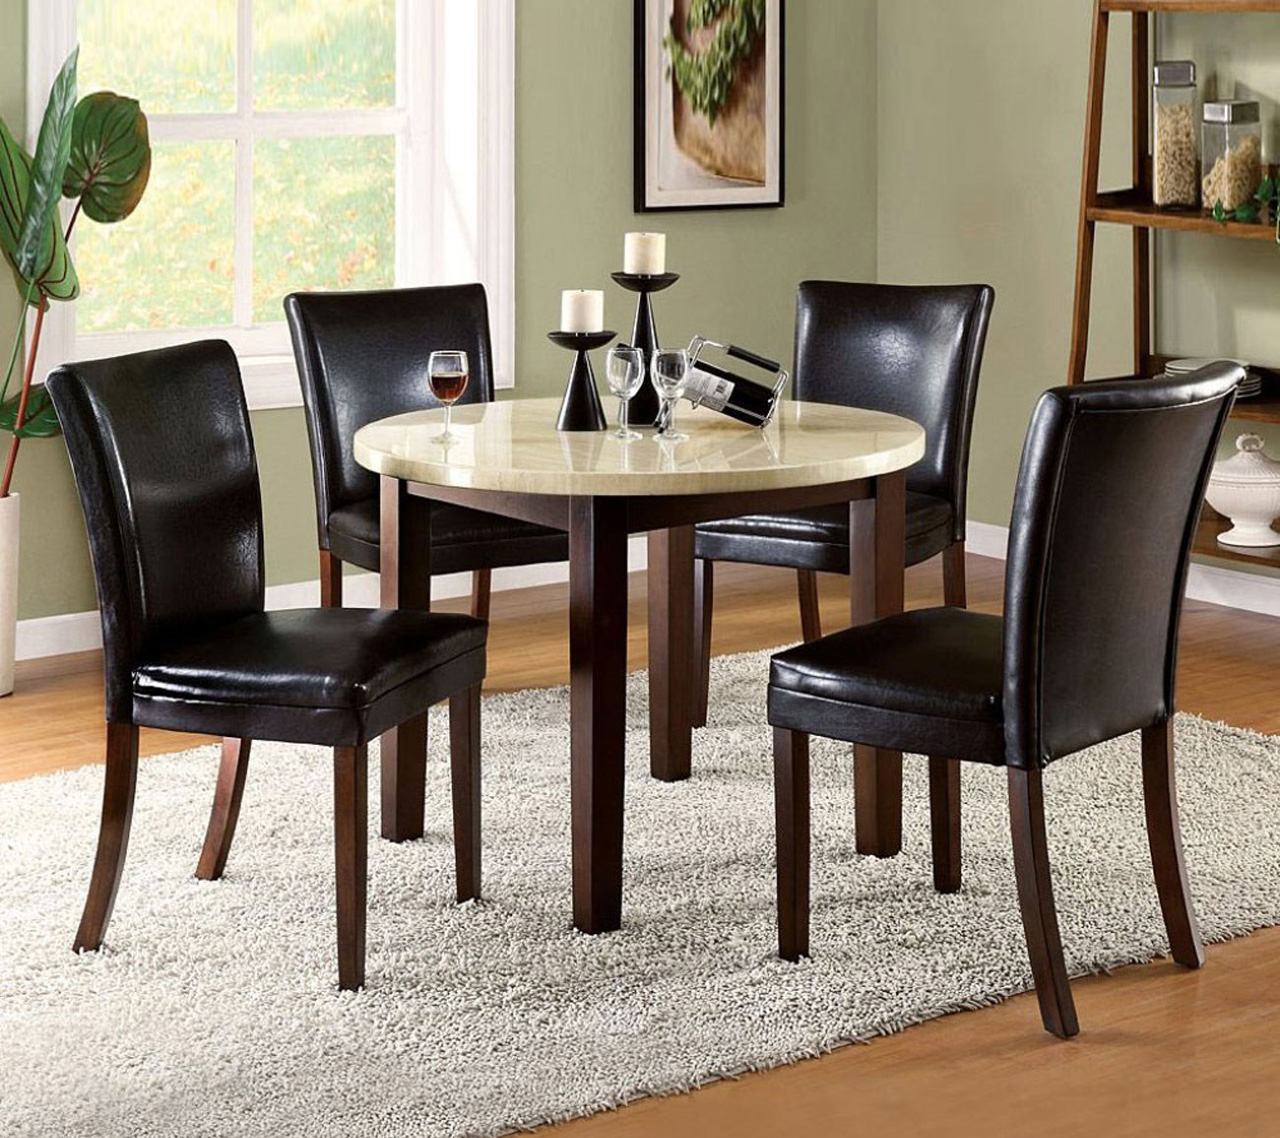 Round Dining Small Classic Round Dining Tables For Small Dining Room Spaces Design Ideas With Unique Wooden Chair With Padded Seat Also Modern Grey Carpet For Dining Room Dining Room Choosing The Right Dining Room Tables